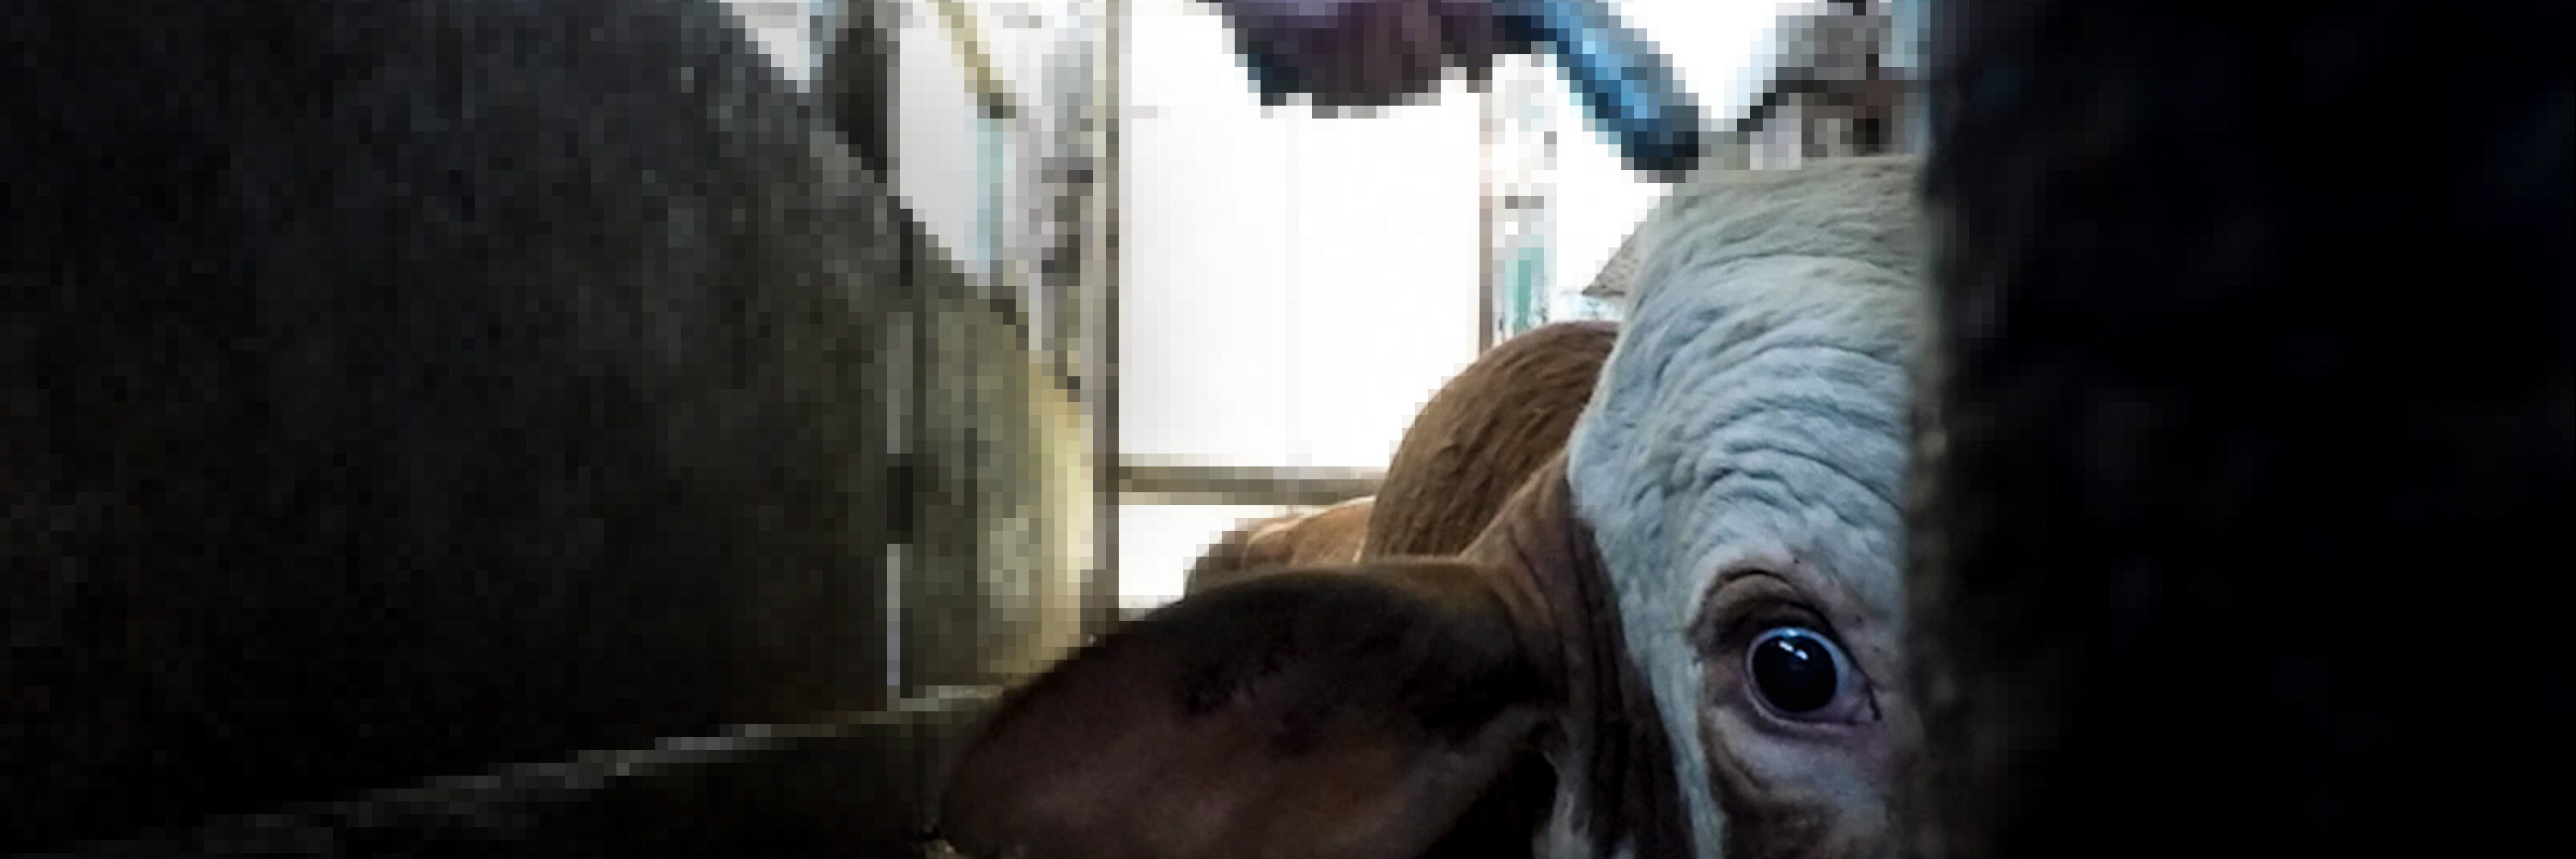 cow looking at the camera with a slaughterhouse worker pointing a gun at the cow's head